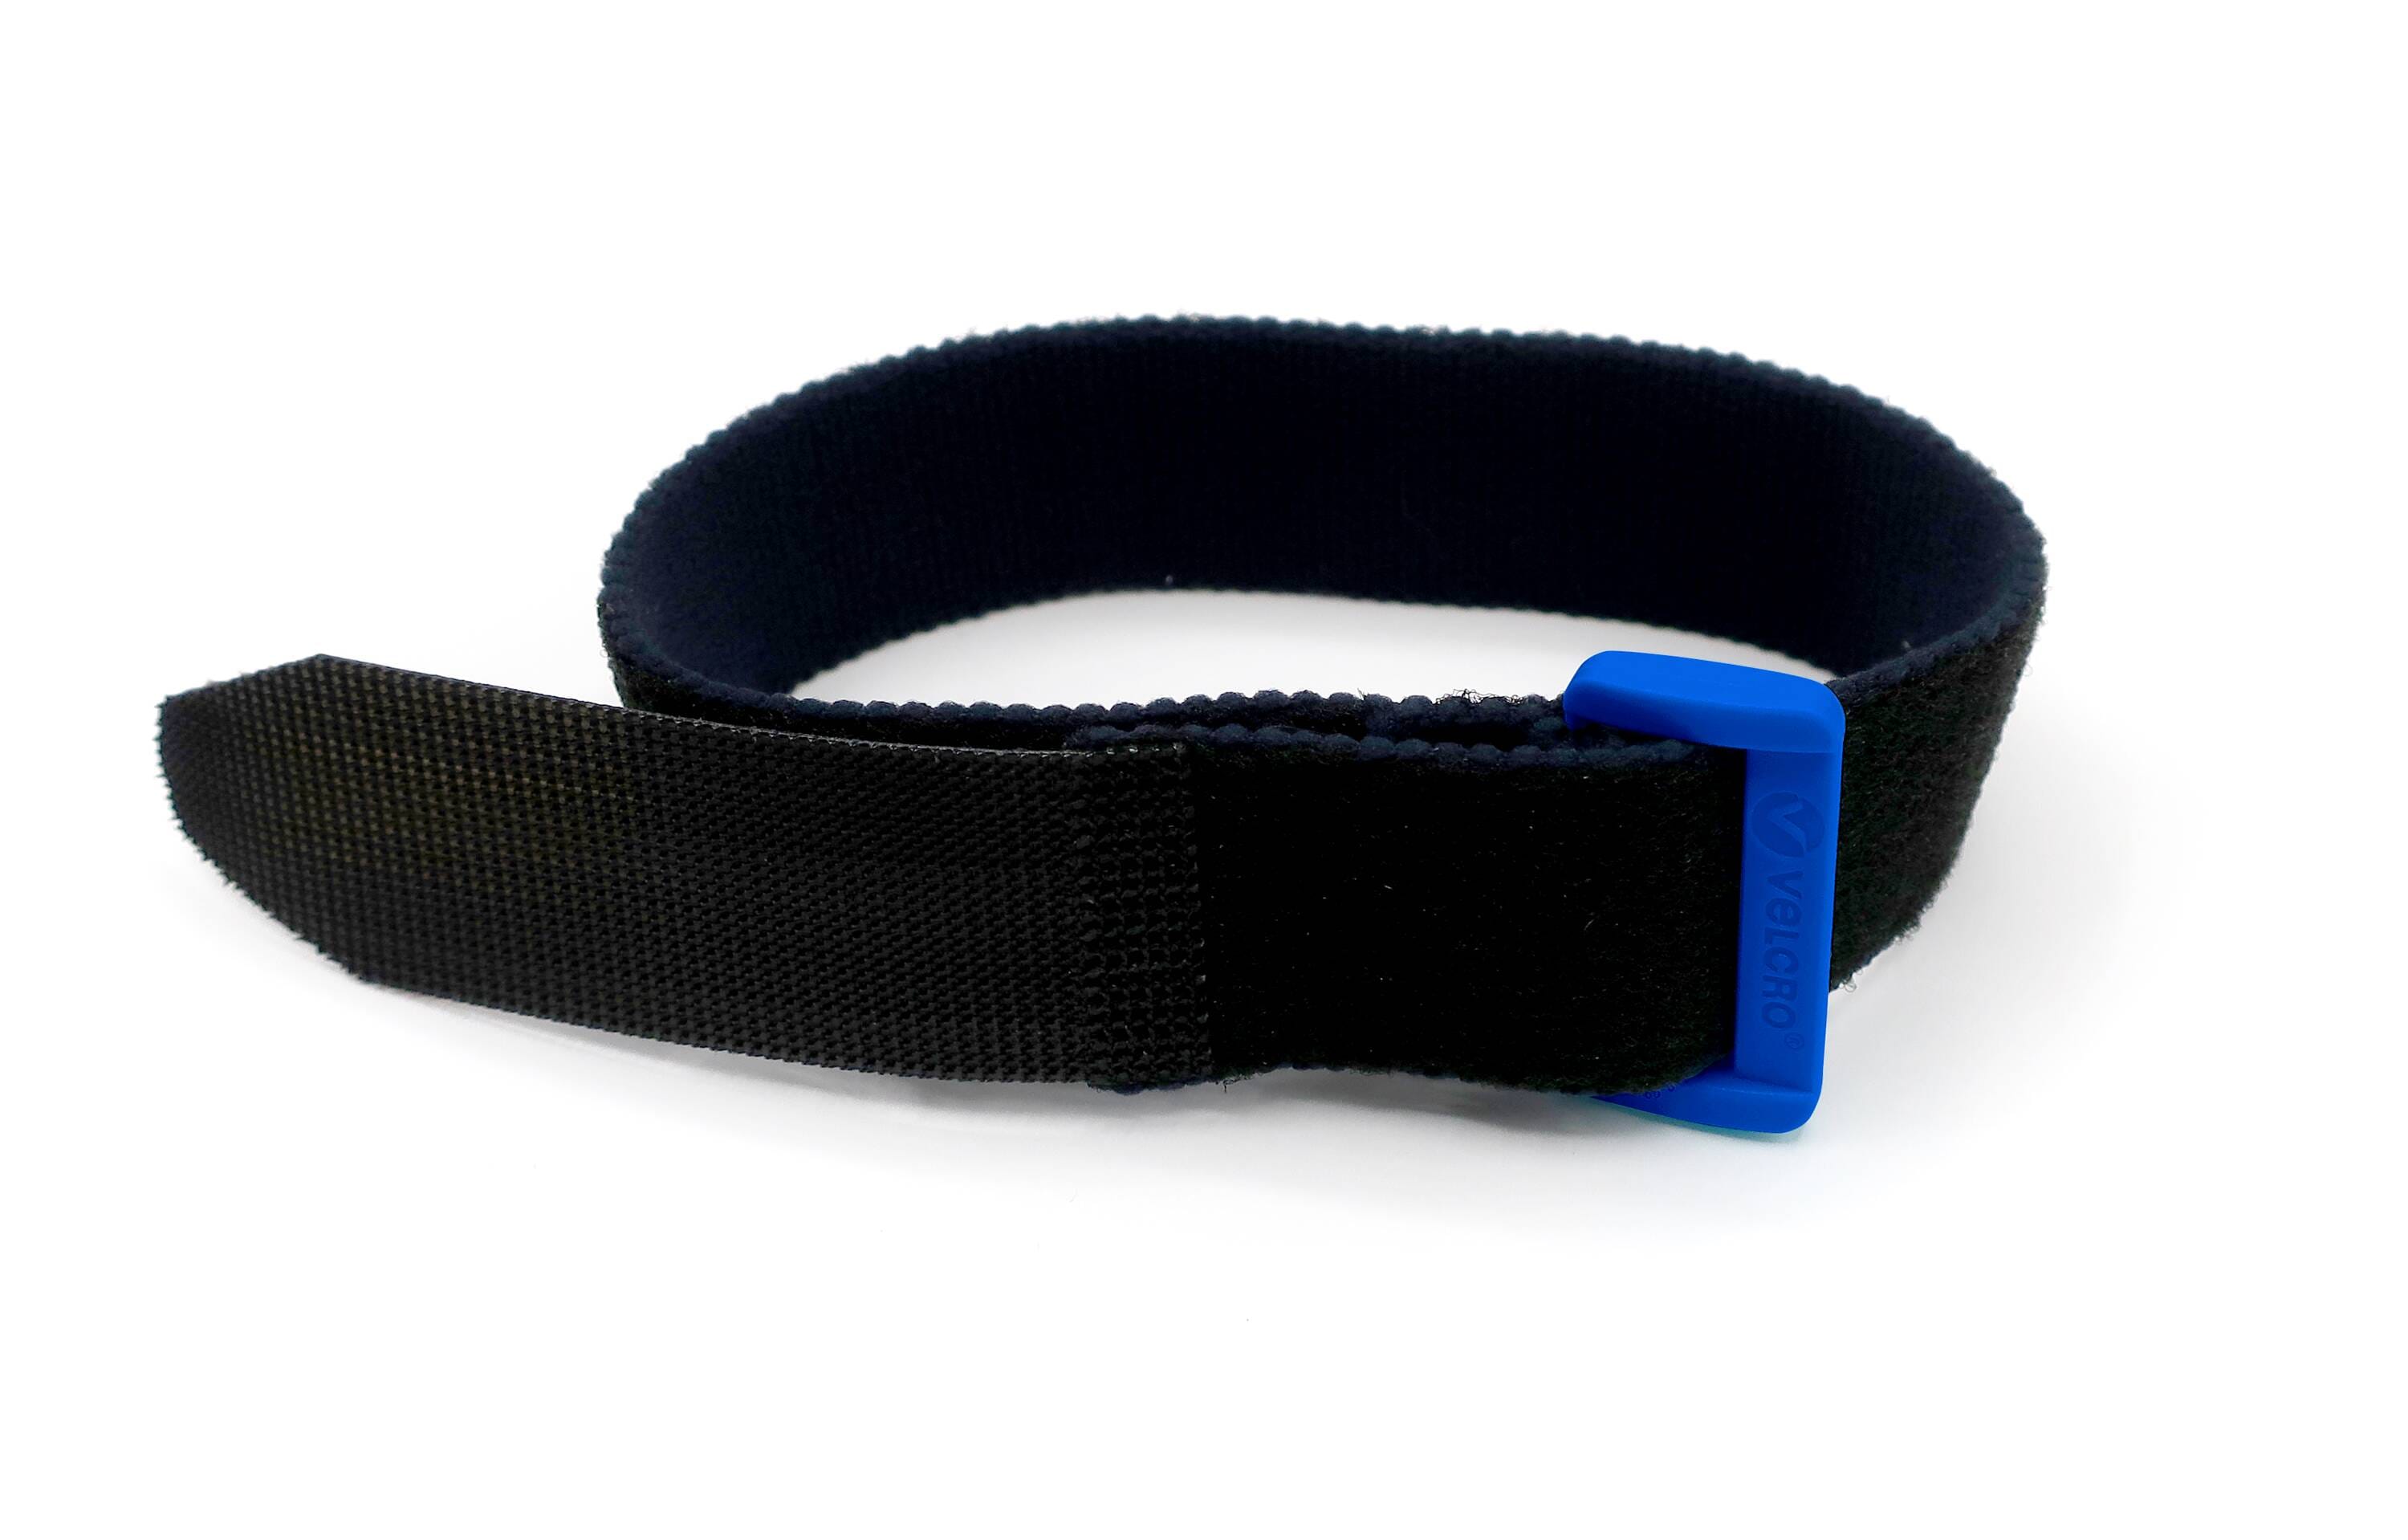 All Purpose Elastic Cinch Strap - 8 x 1 Inch - 5 Pack - Secure